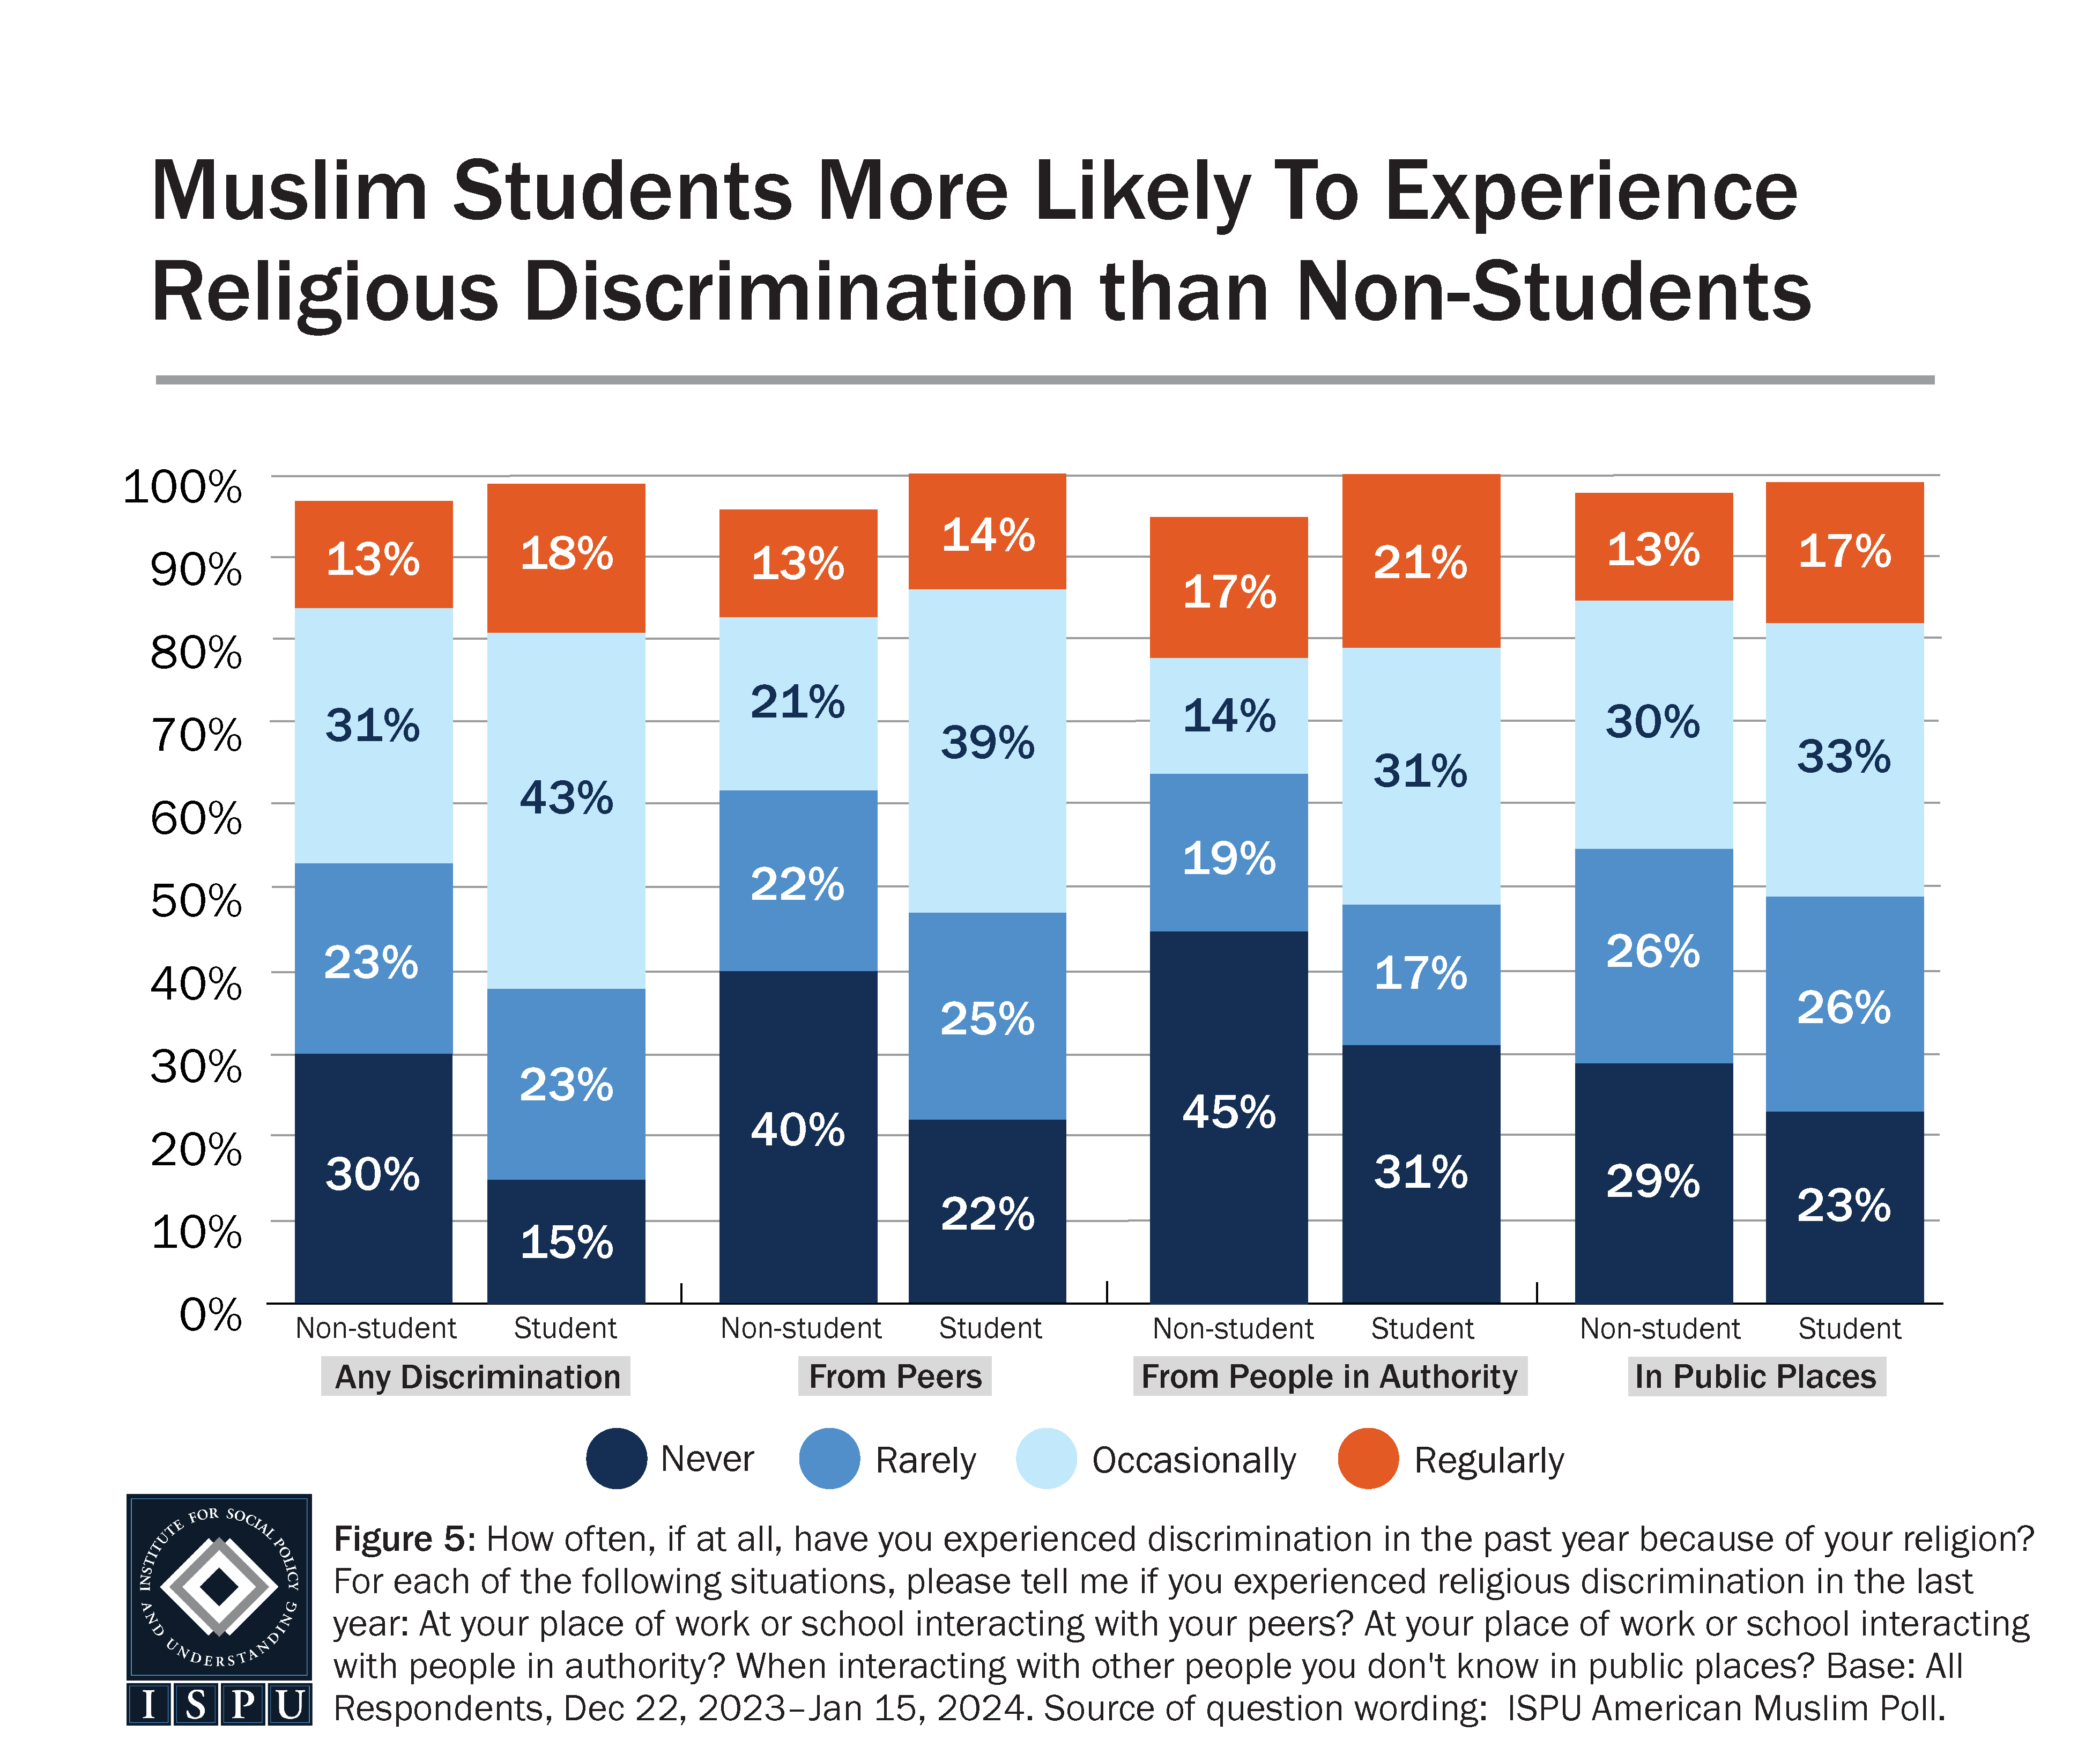 A bar graph showing the frequency of different types of religious discrimination experienced by Muslim students versus Muslims who are not students.